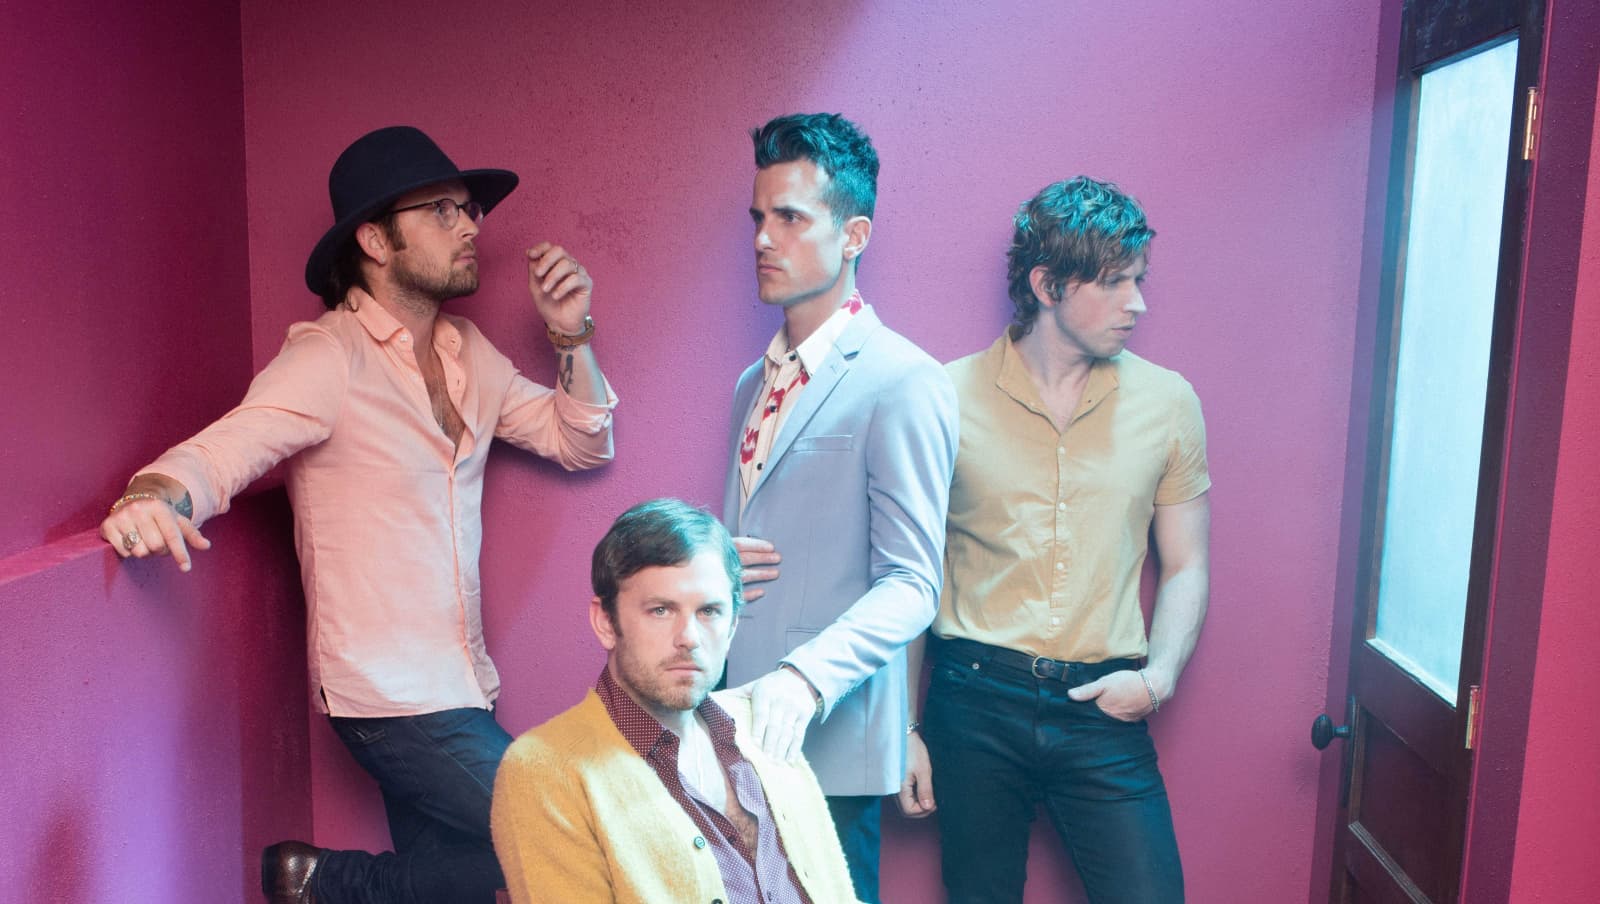 Kings of Leon at First Direct Arena Tickets